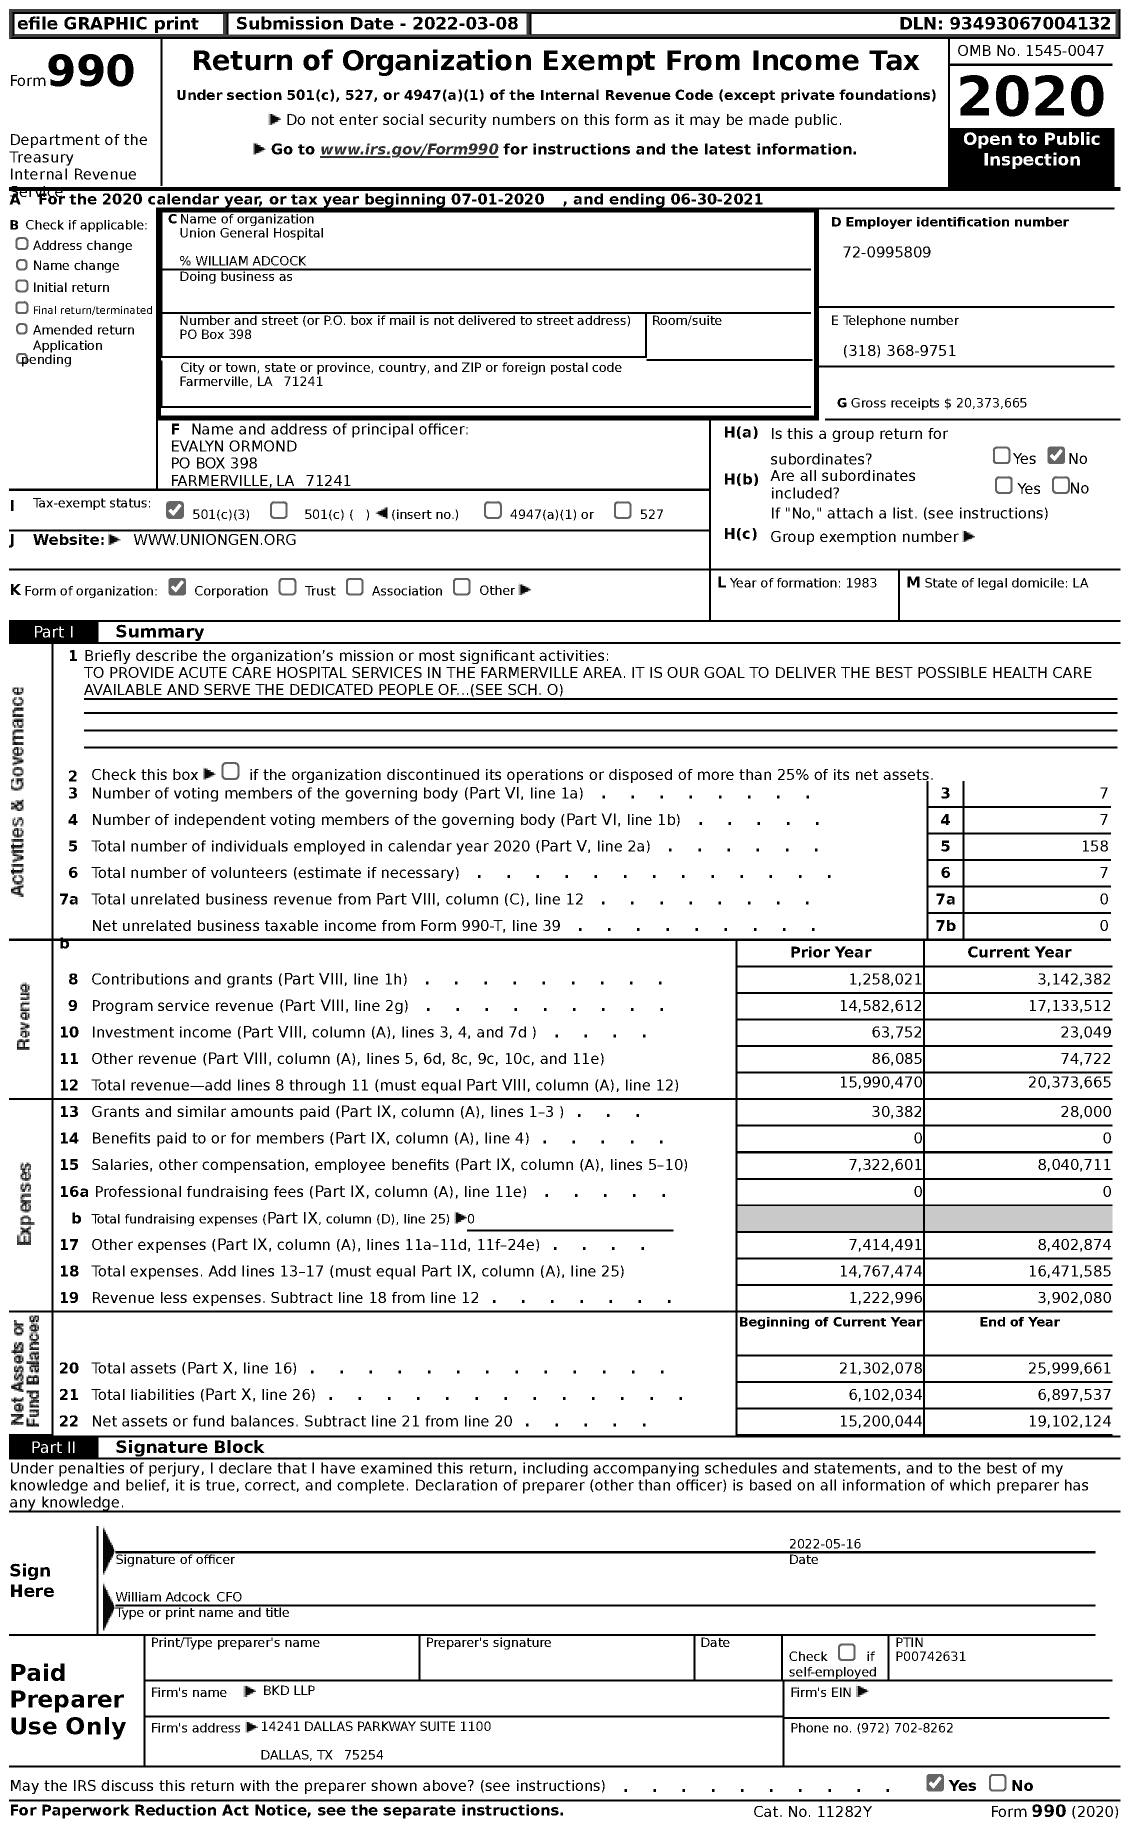 Image of first page of 2020 Form 990 for Union General Hospital (UGH)